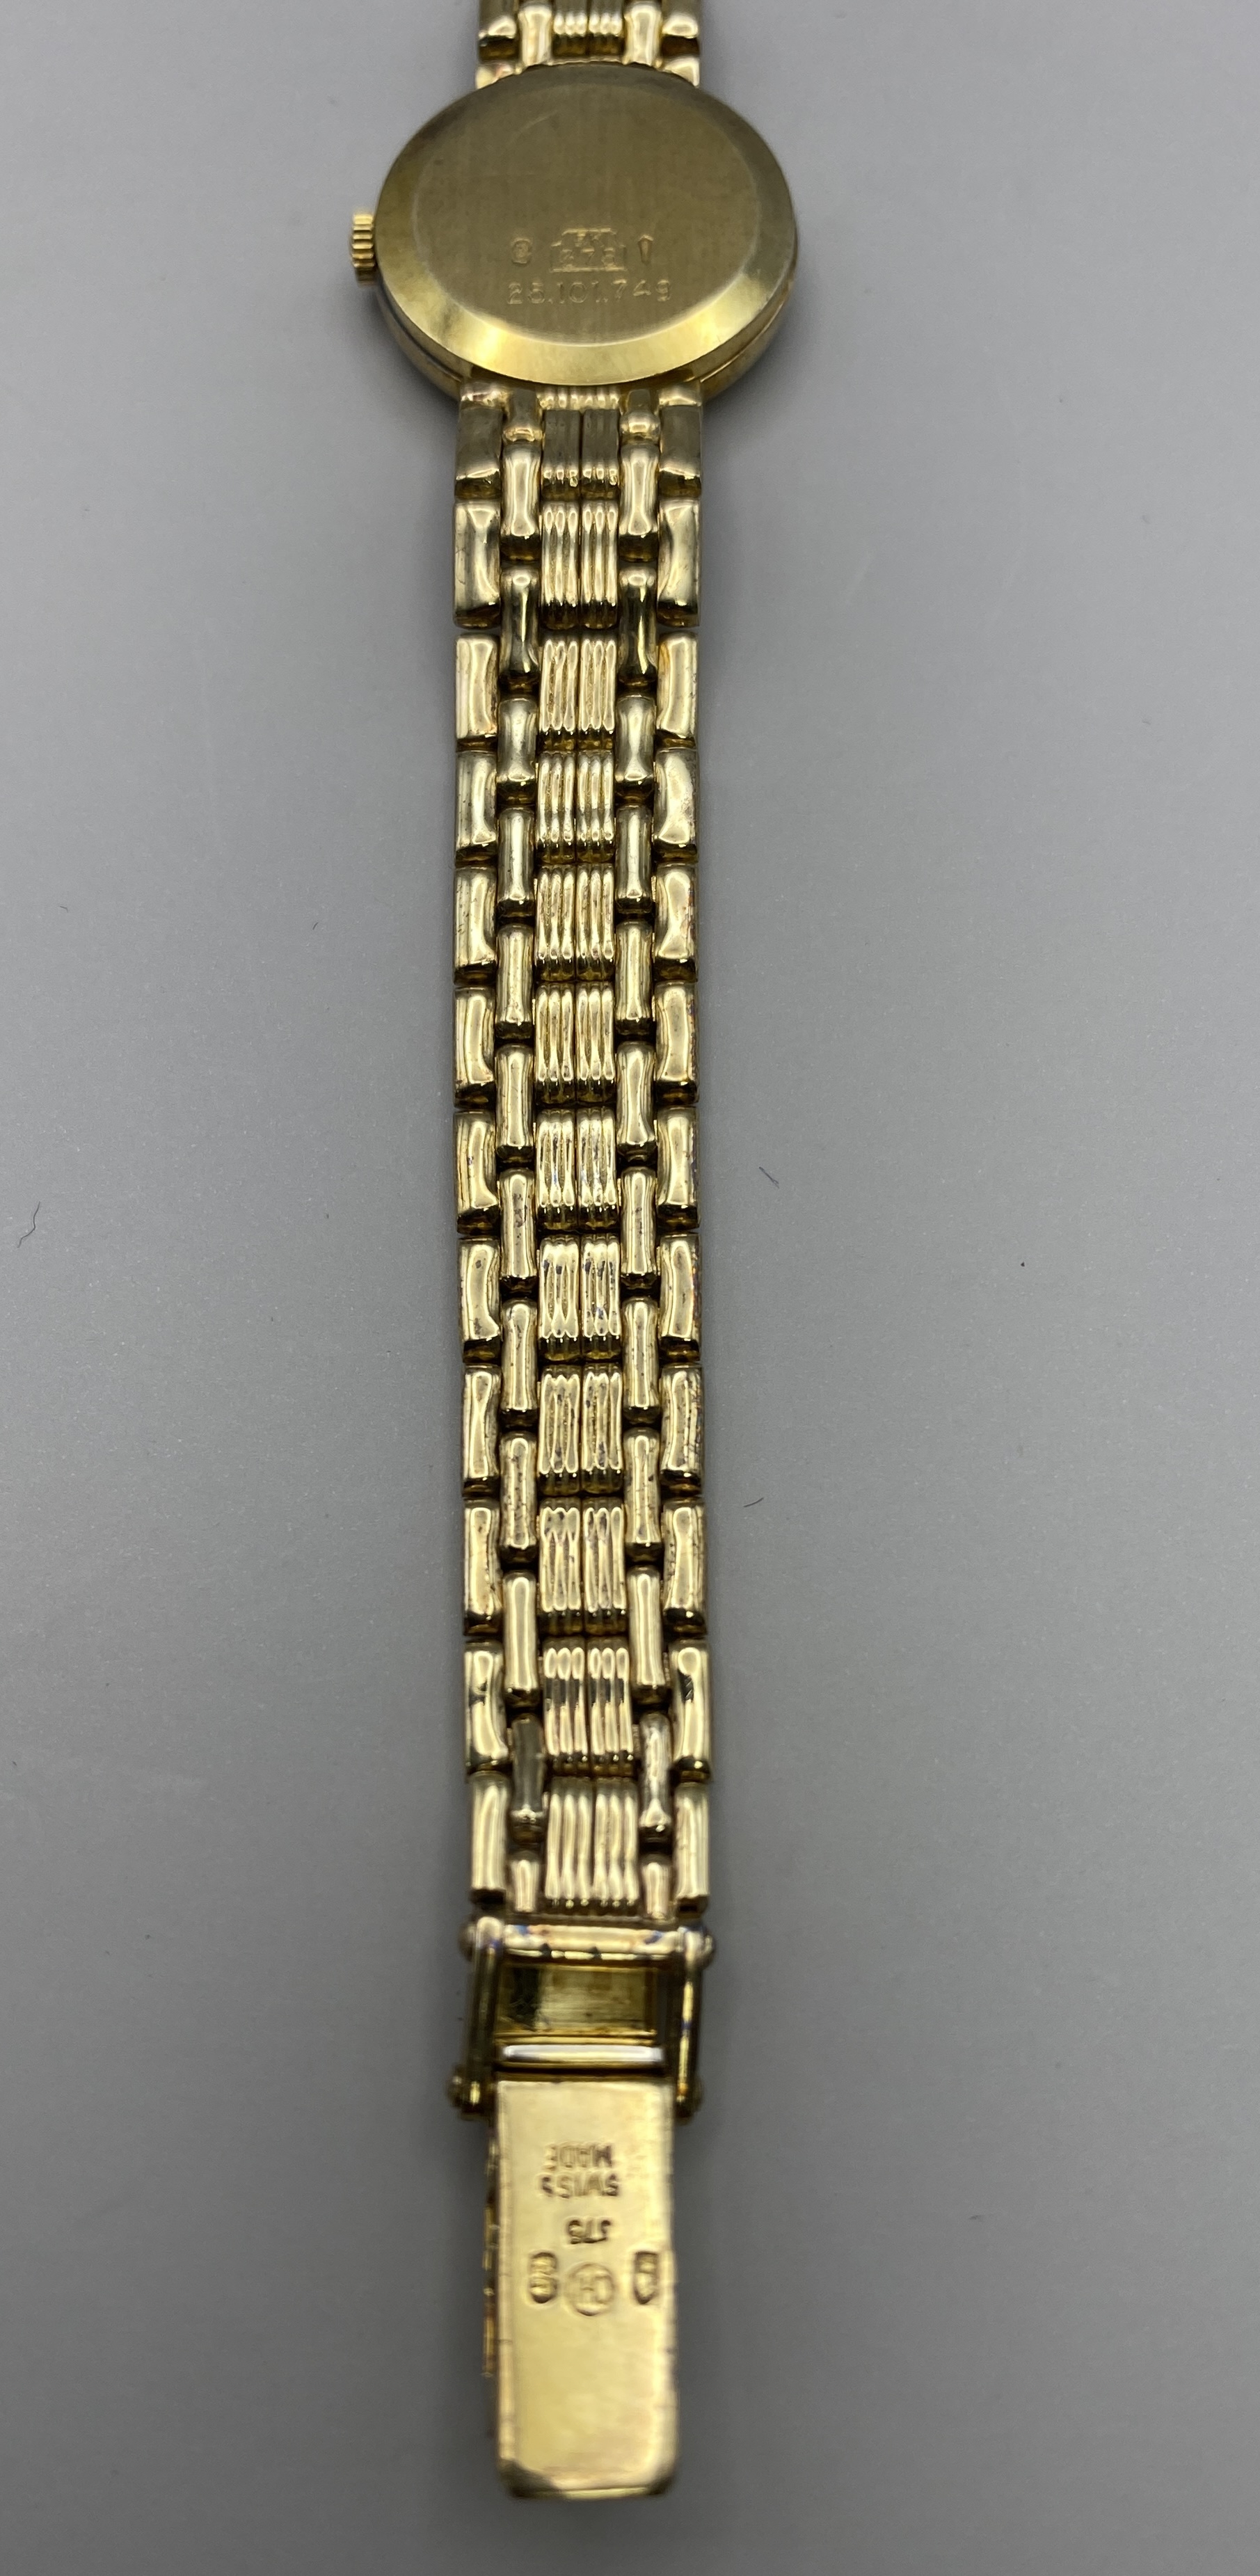 Lady's Longines 9ct Gold Bracelet Dress Watch with unusual clock face showing 2 x'9' instead of '8' - Image 8 of 14